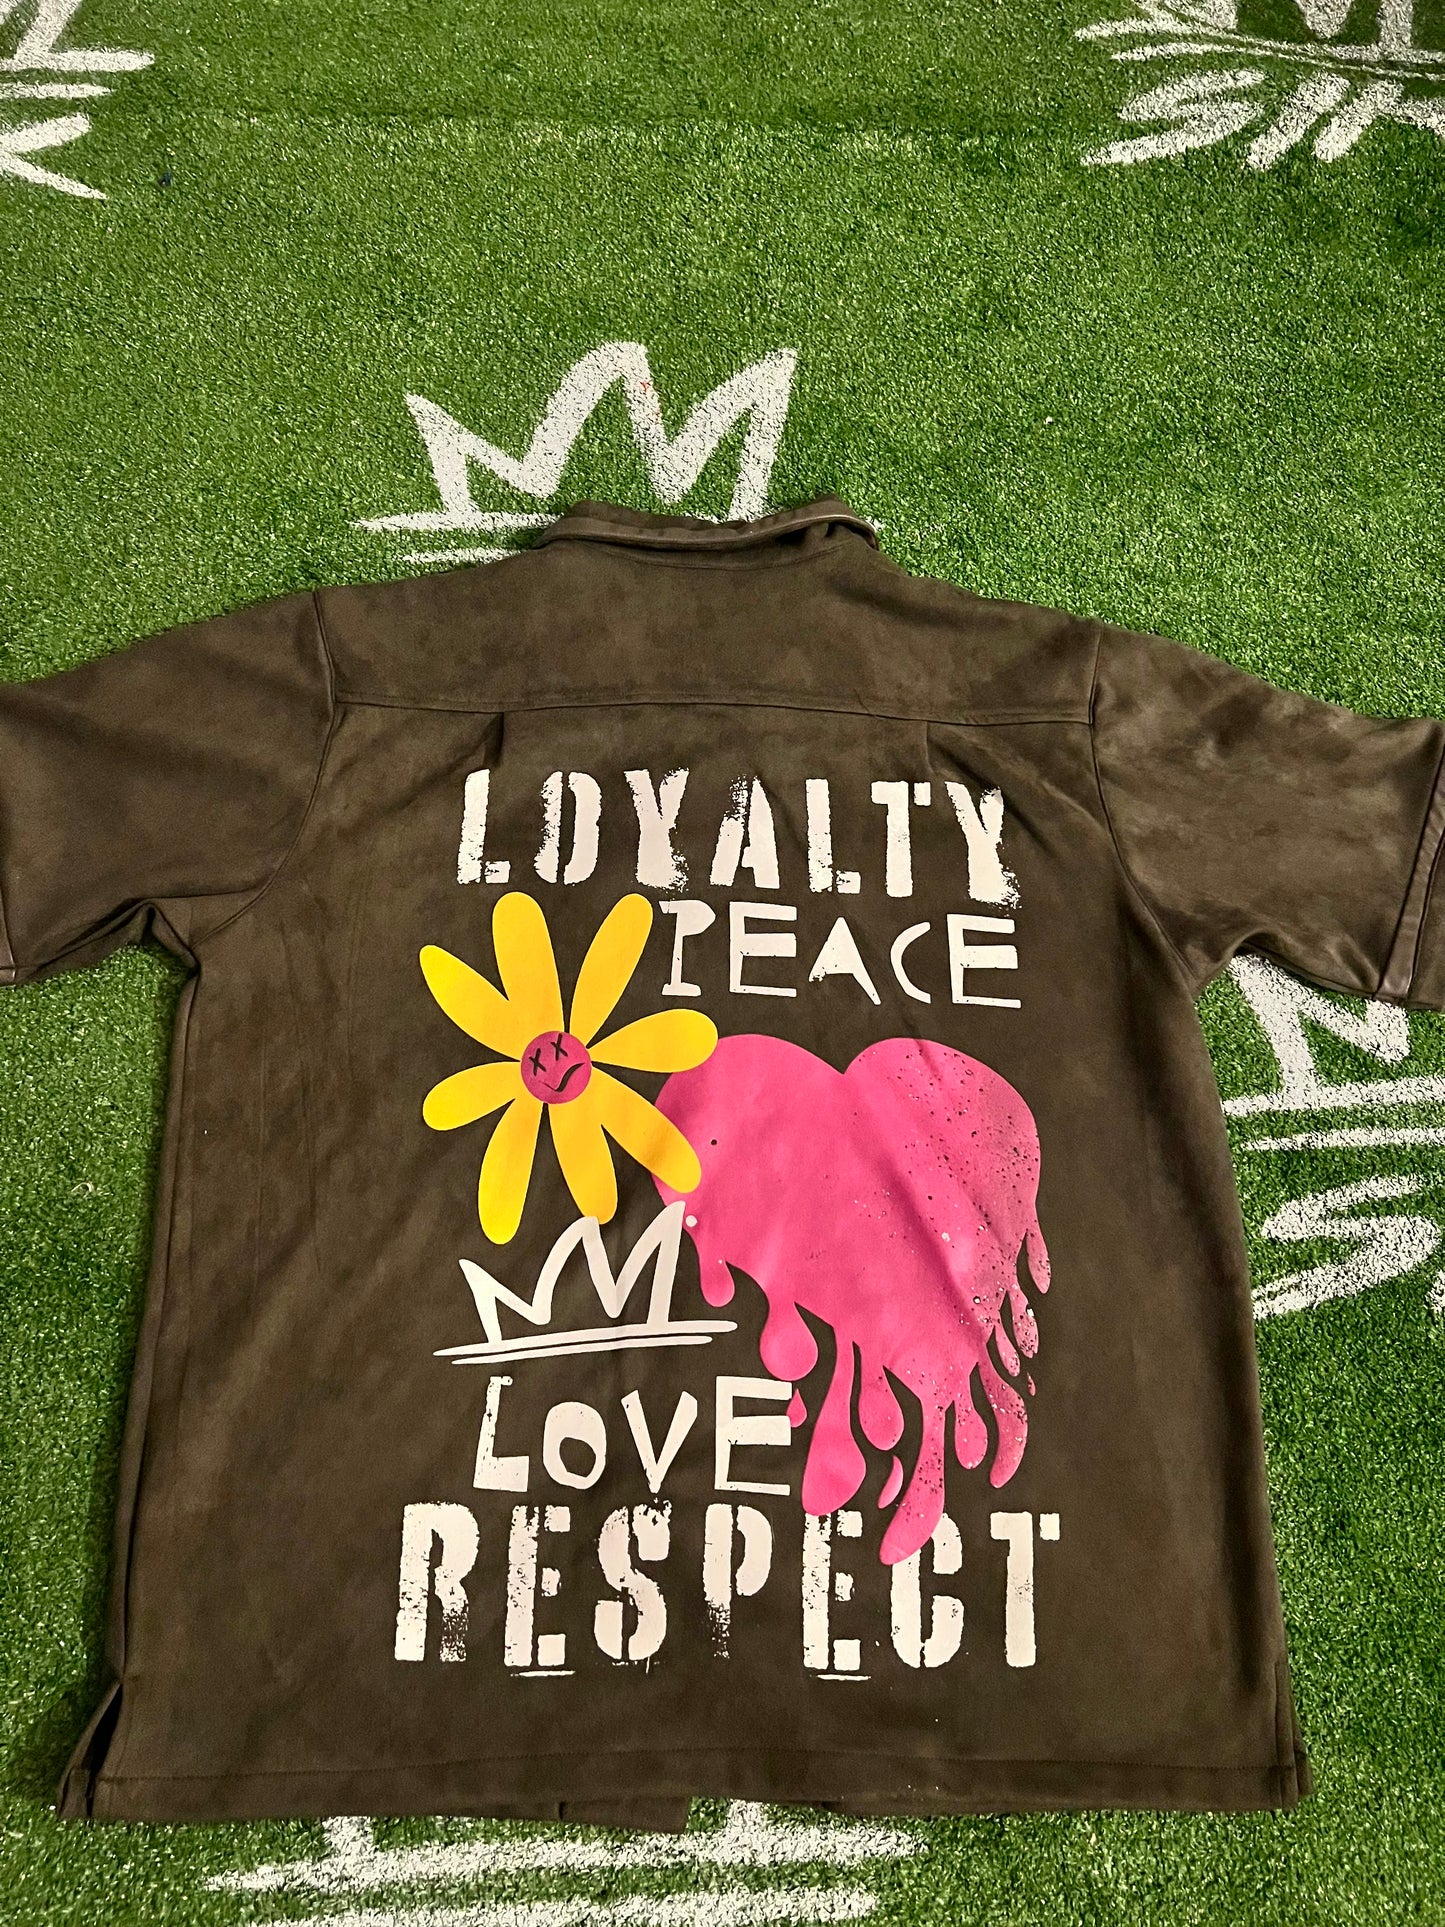 Loyalty, Peace, Love, Respect. (Olive)